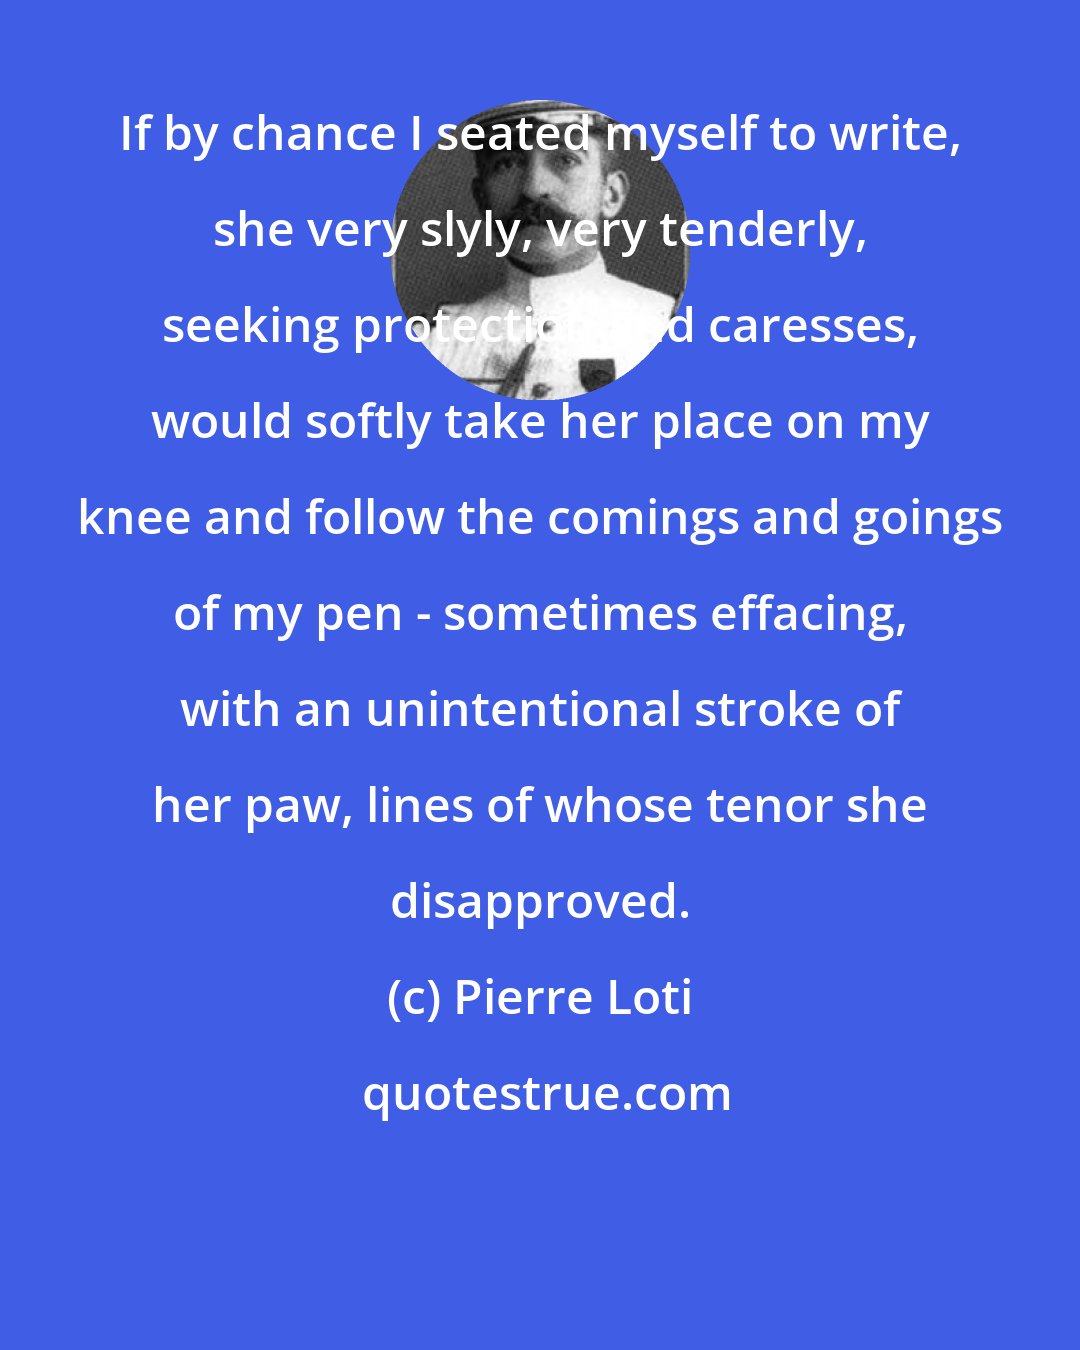 Pierre Loti: If by chance I seated myself to write, she very slyly, very tenderly, seeking protection and caresses, would softly take her place on my knee and follow the comings and goings of my pen - sometimes effacing, with an unintentional stroke of her paw, lines of whose tenor she disapproved.